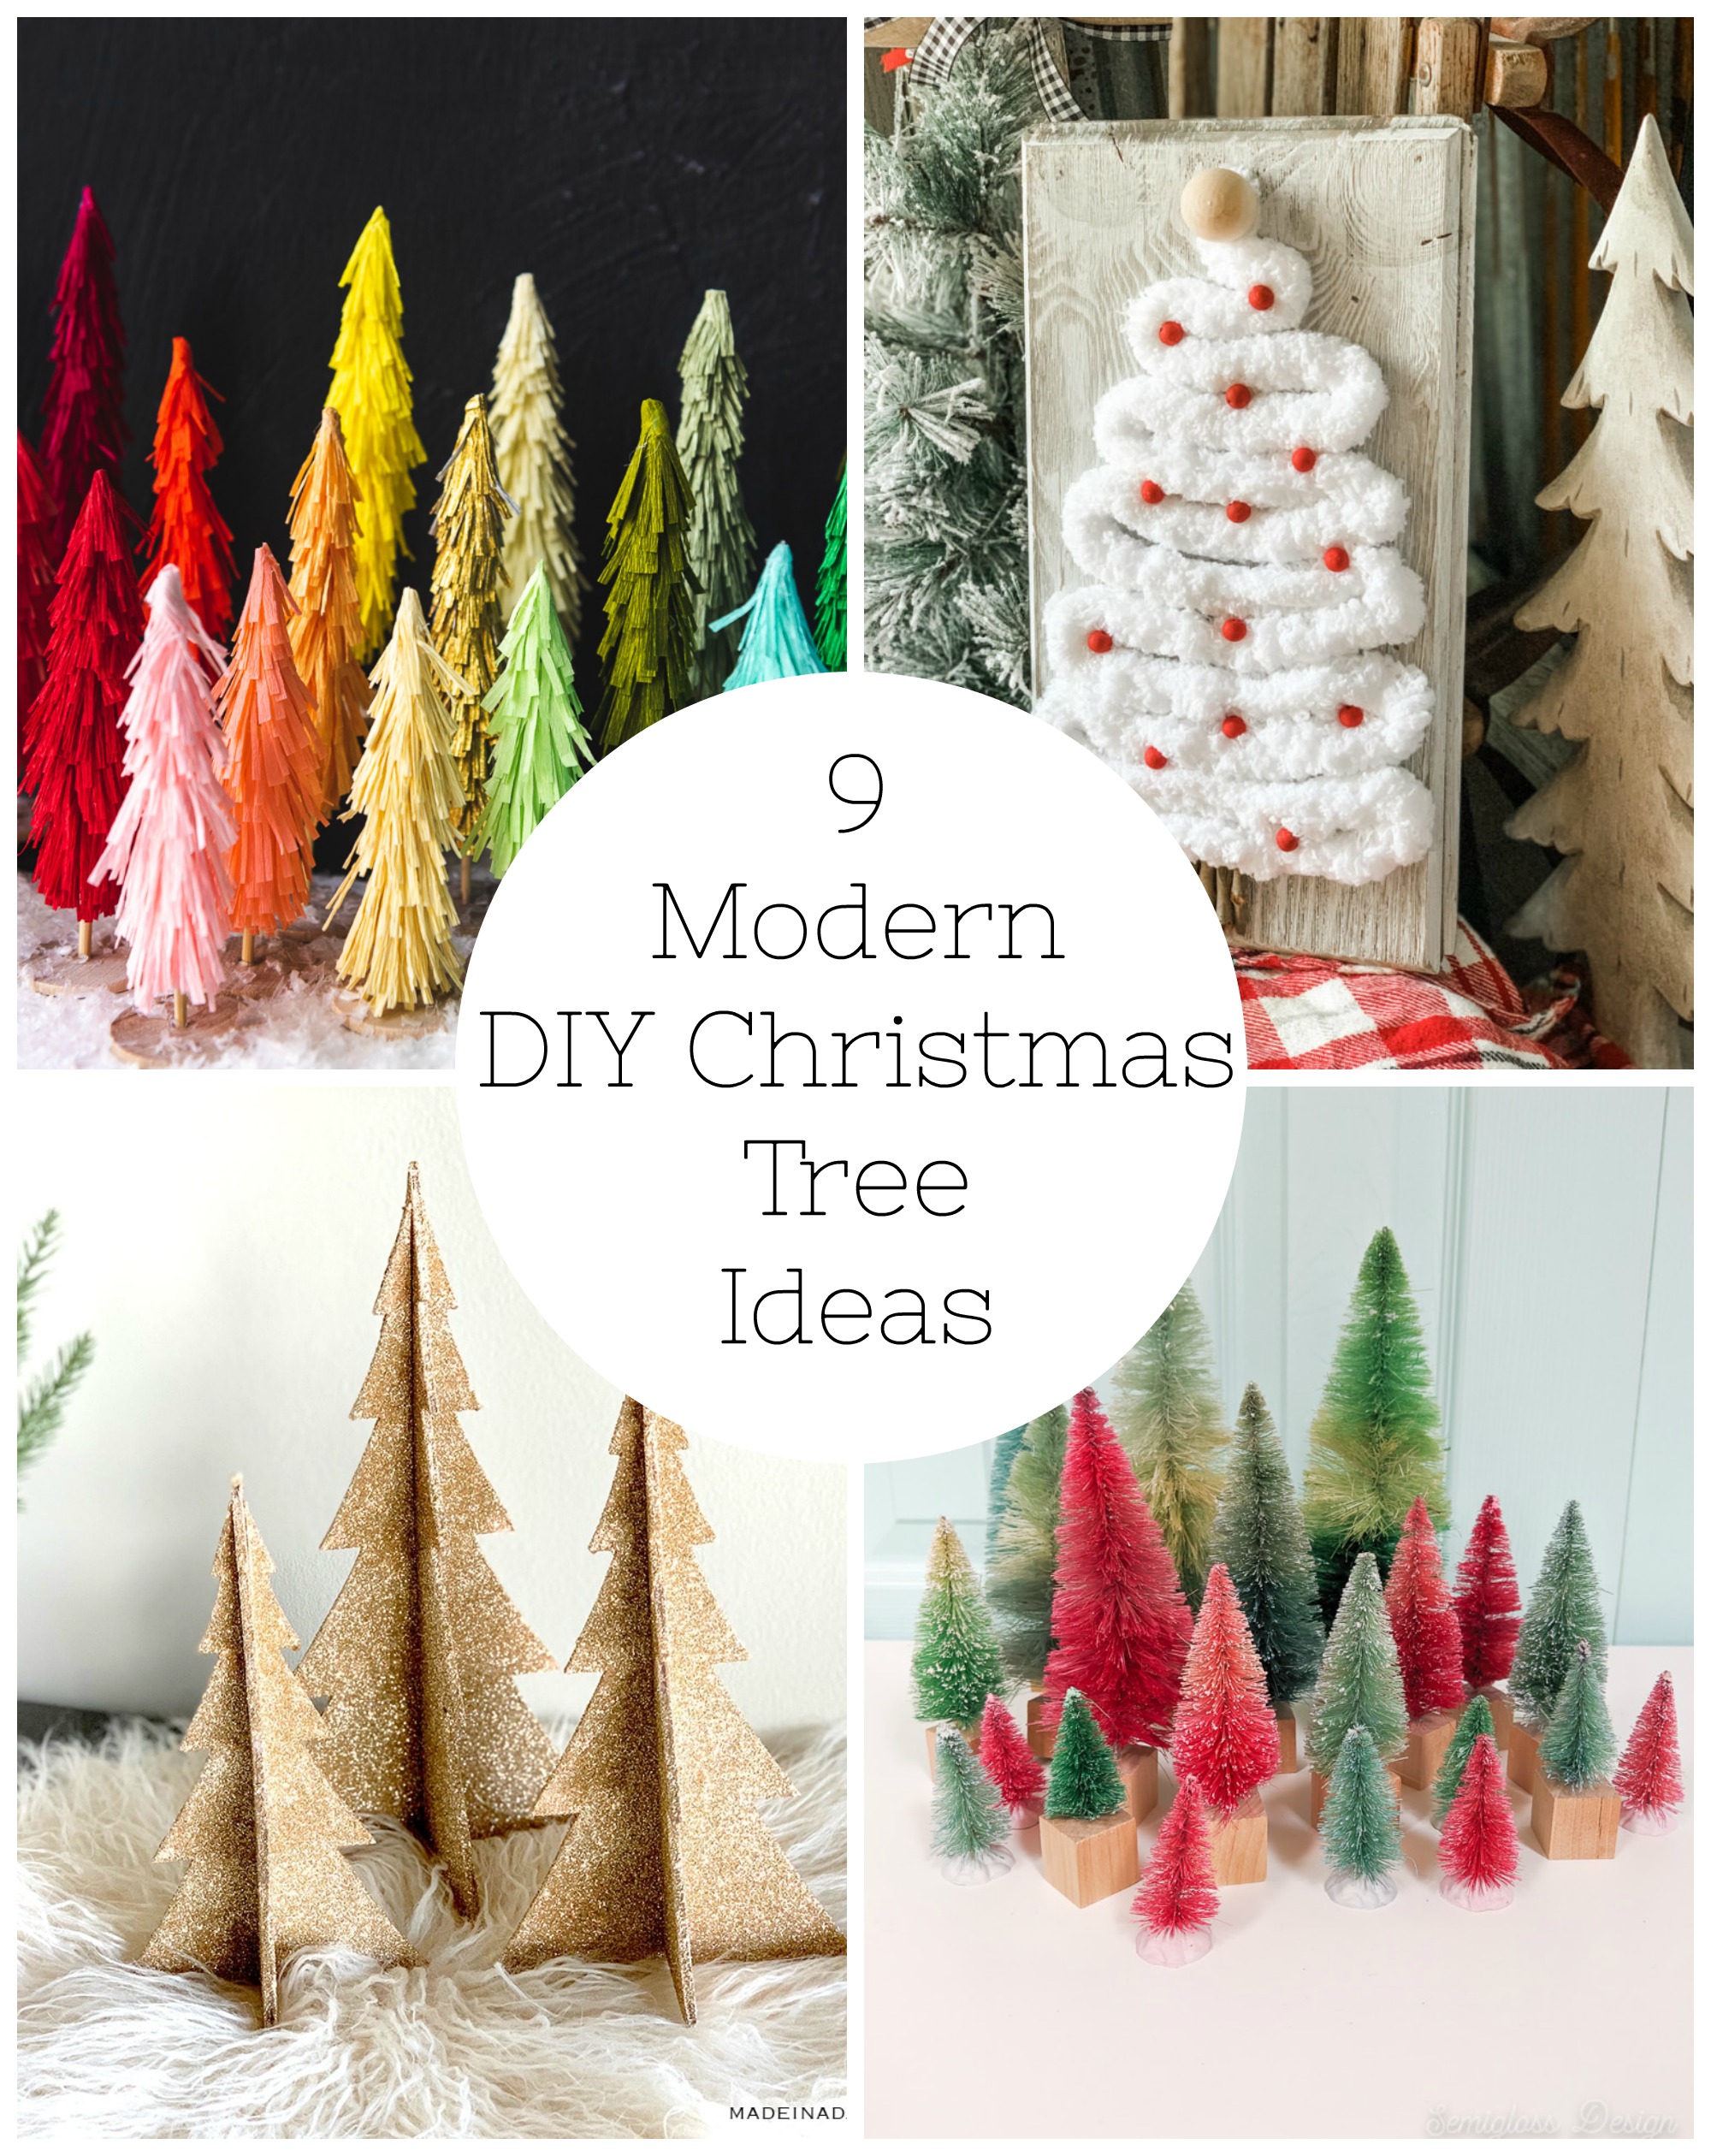 9 Now Ideas for Modern DIY Christmas Tree Decor - Make and Takes